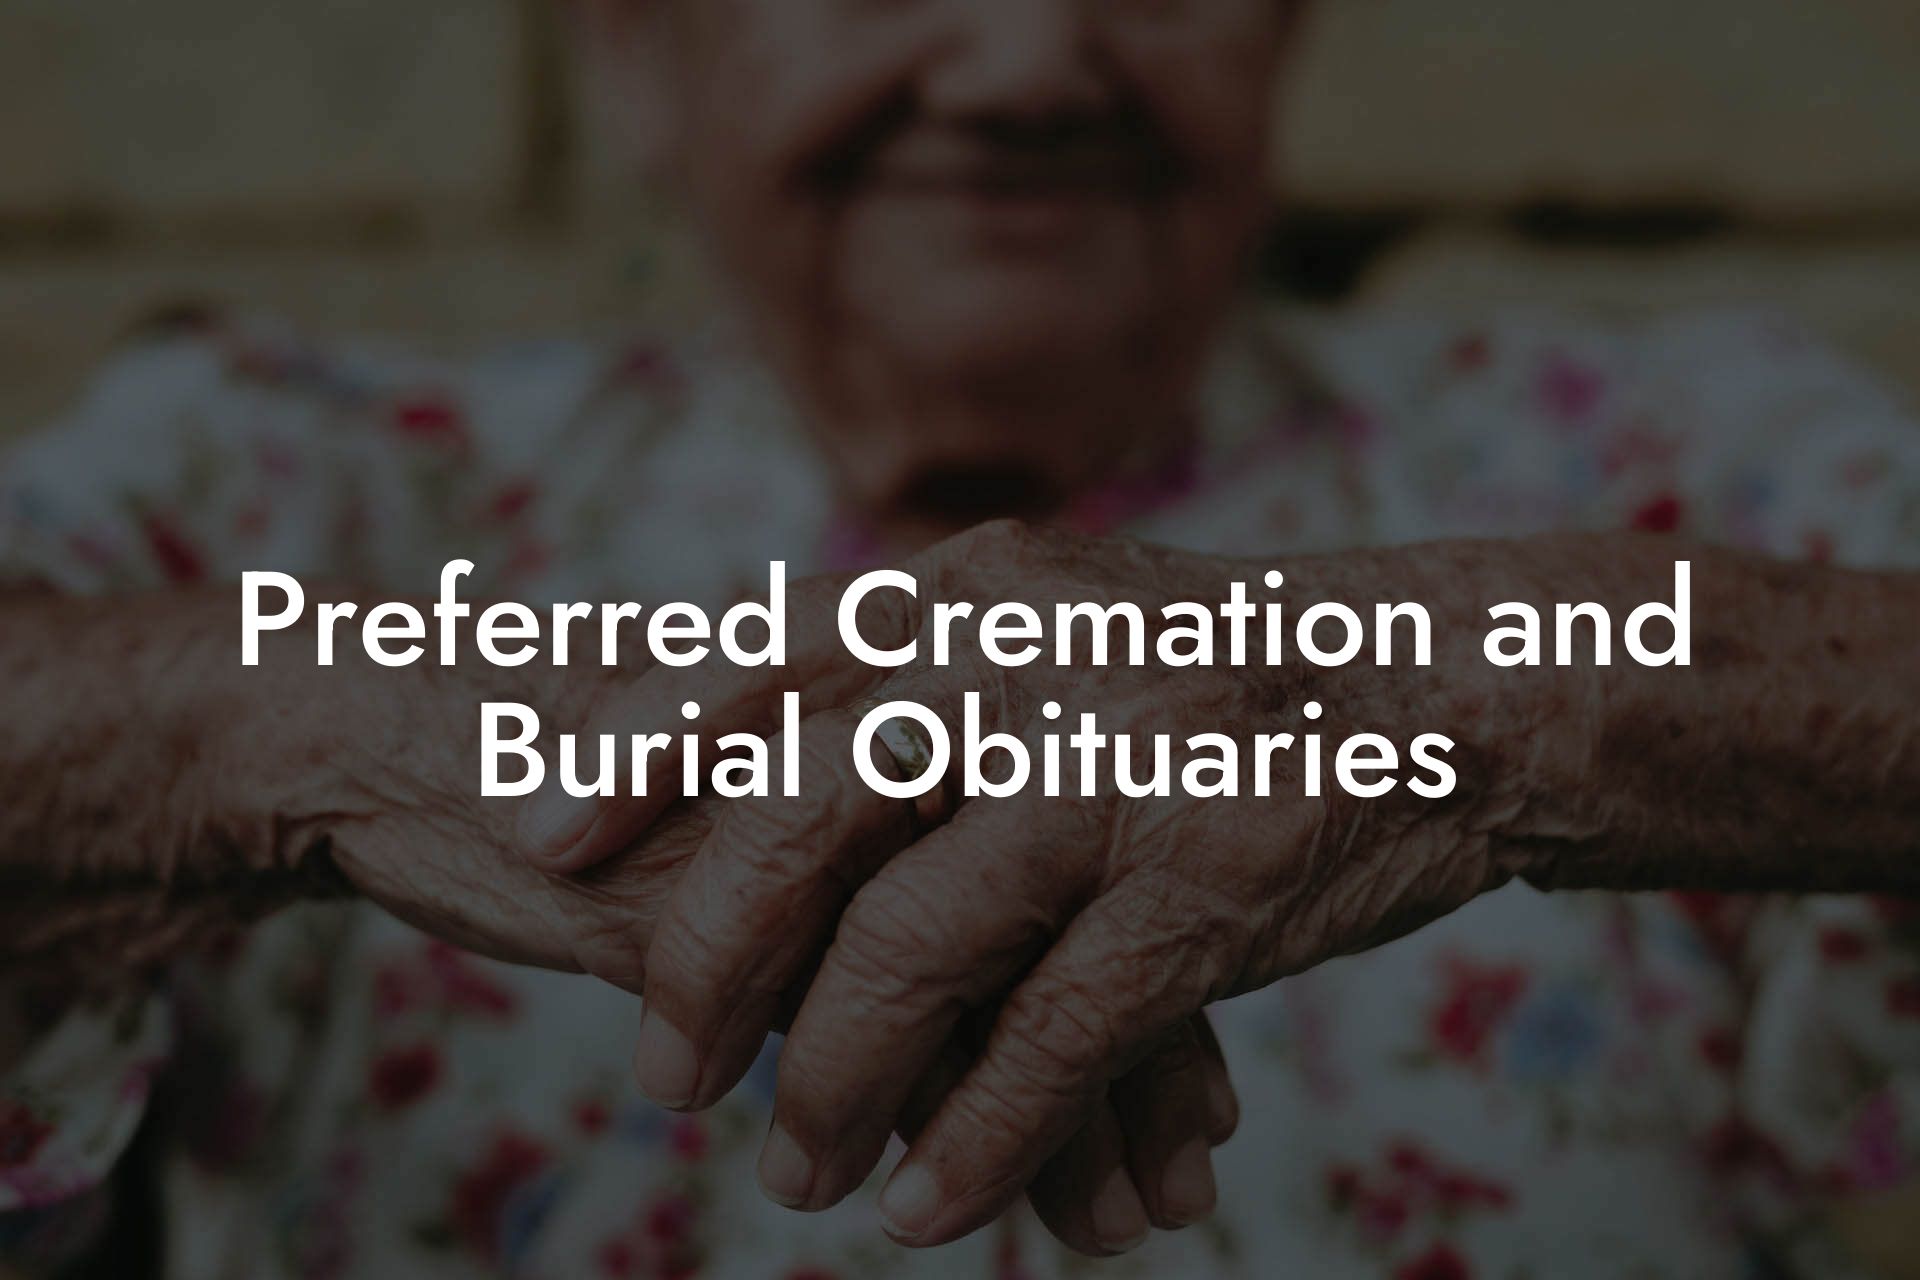 Preferred Cremation and Burial Obituaries